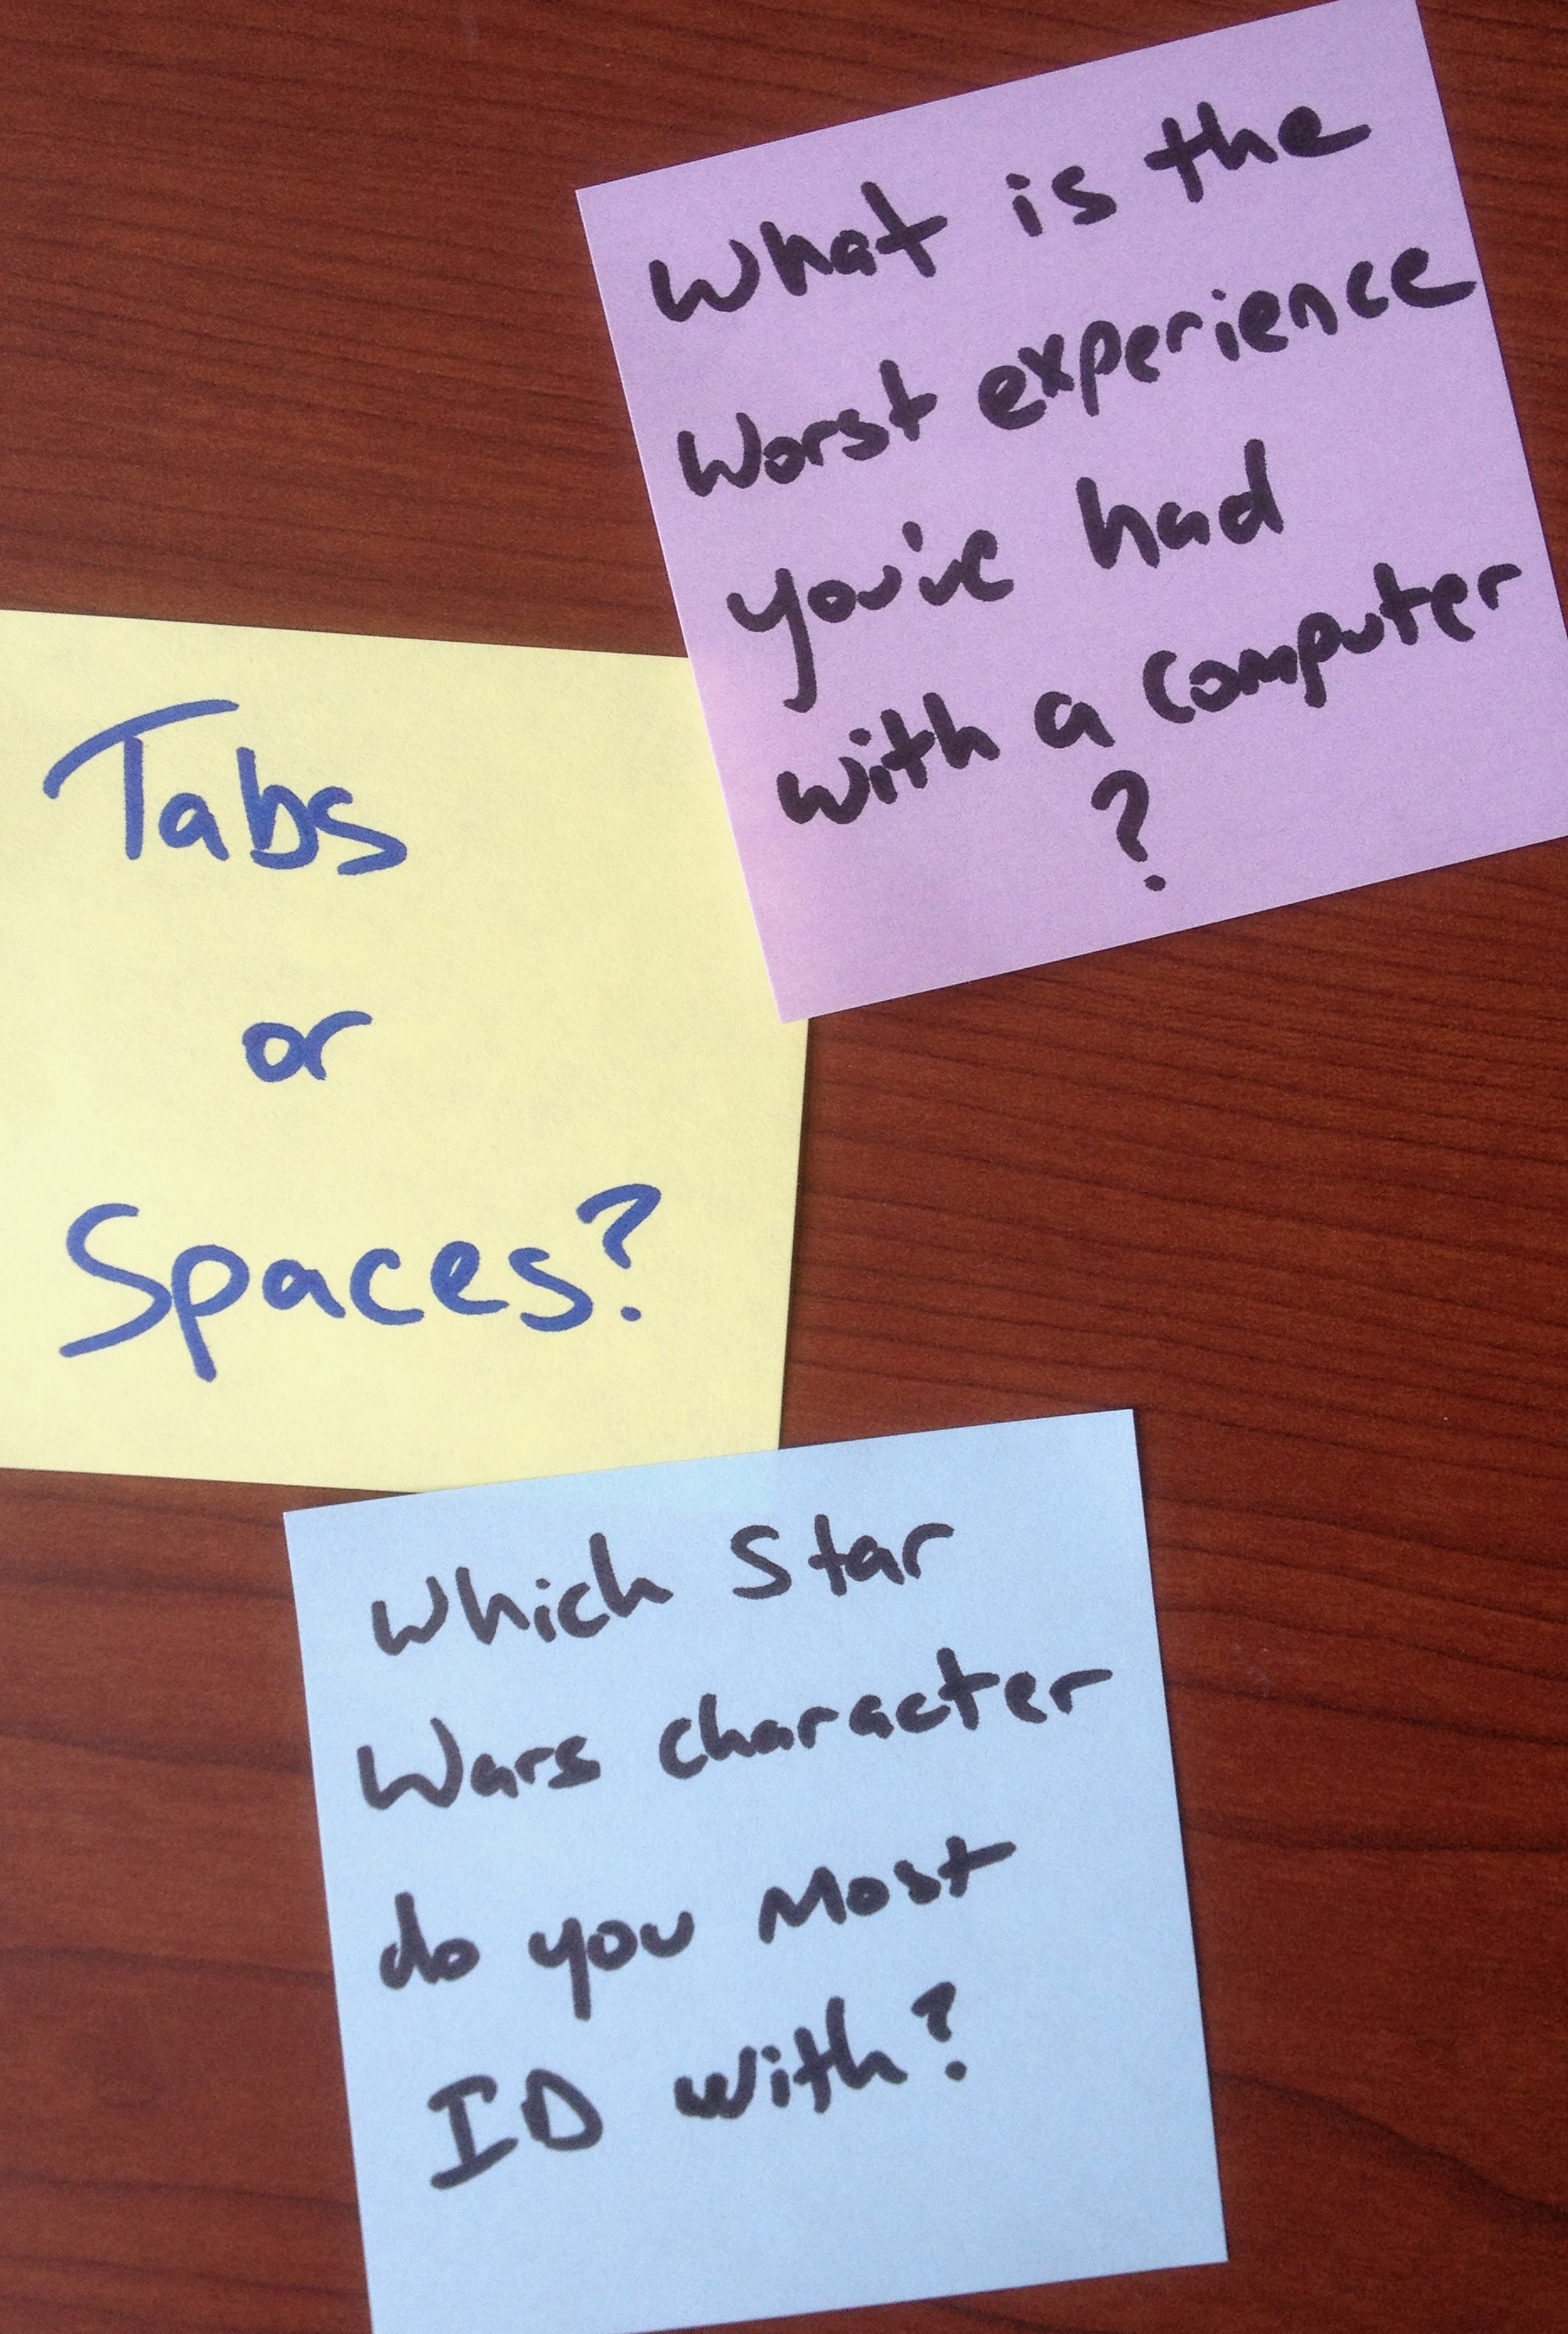 A desk with some Post-it Style Notes with Questions on Them